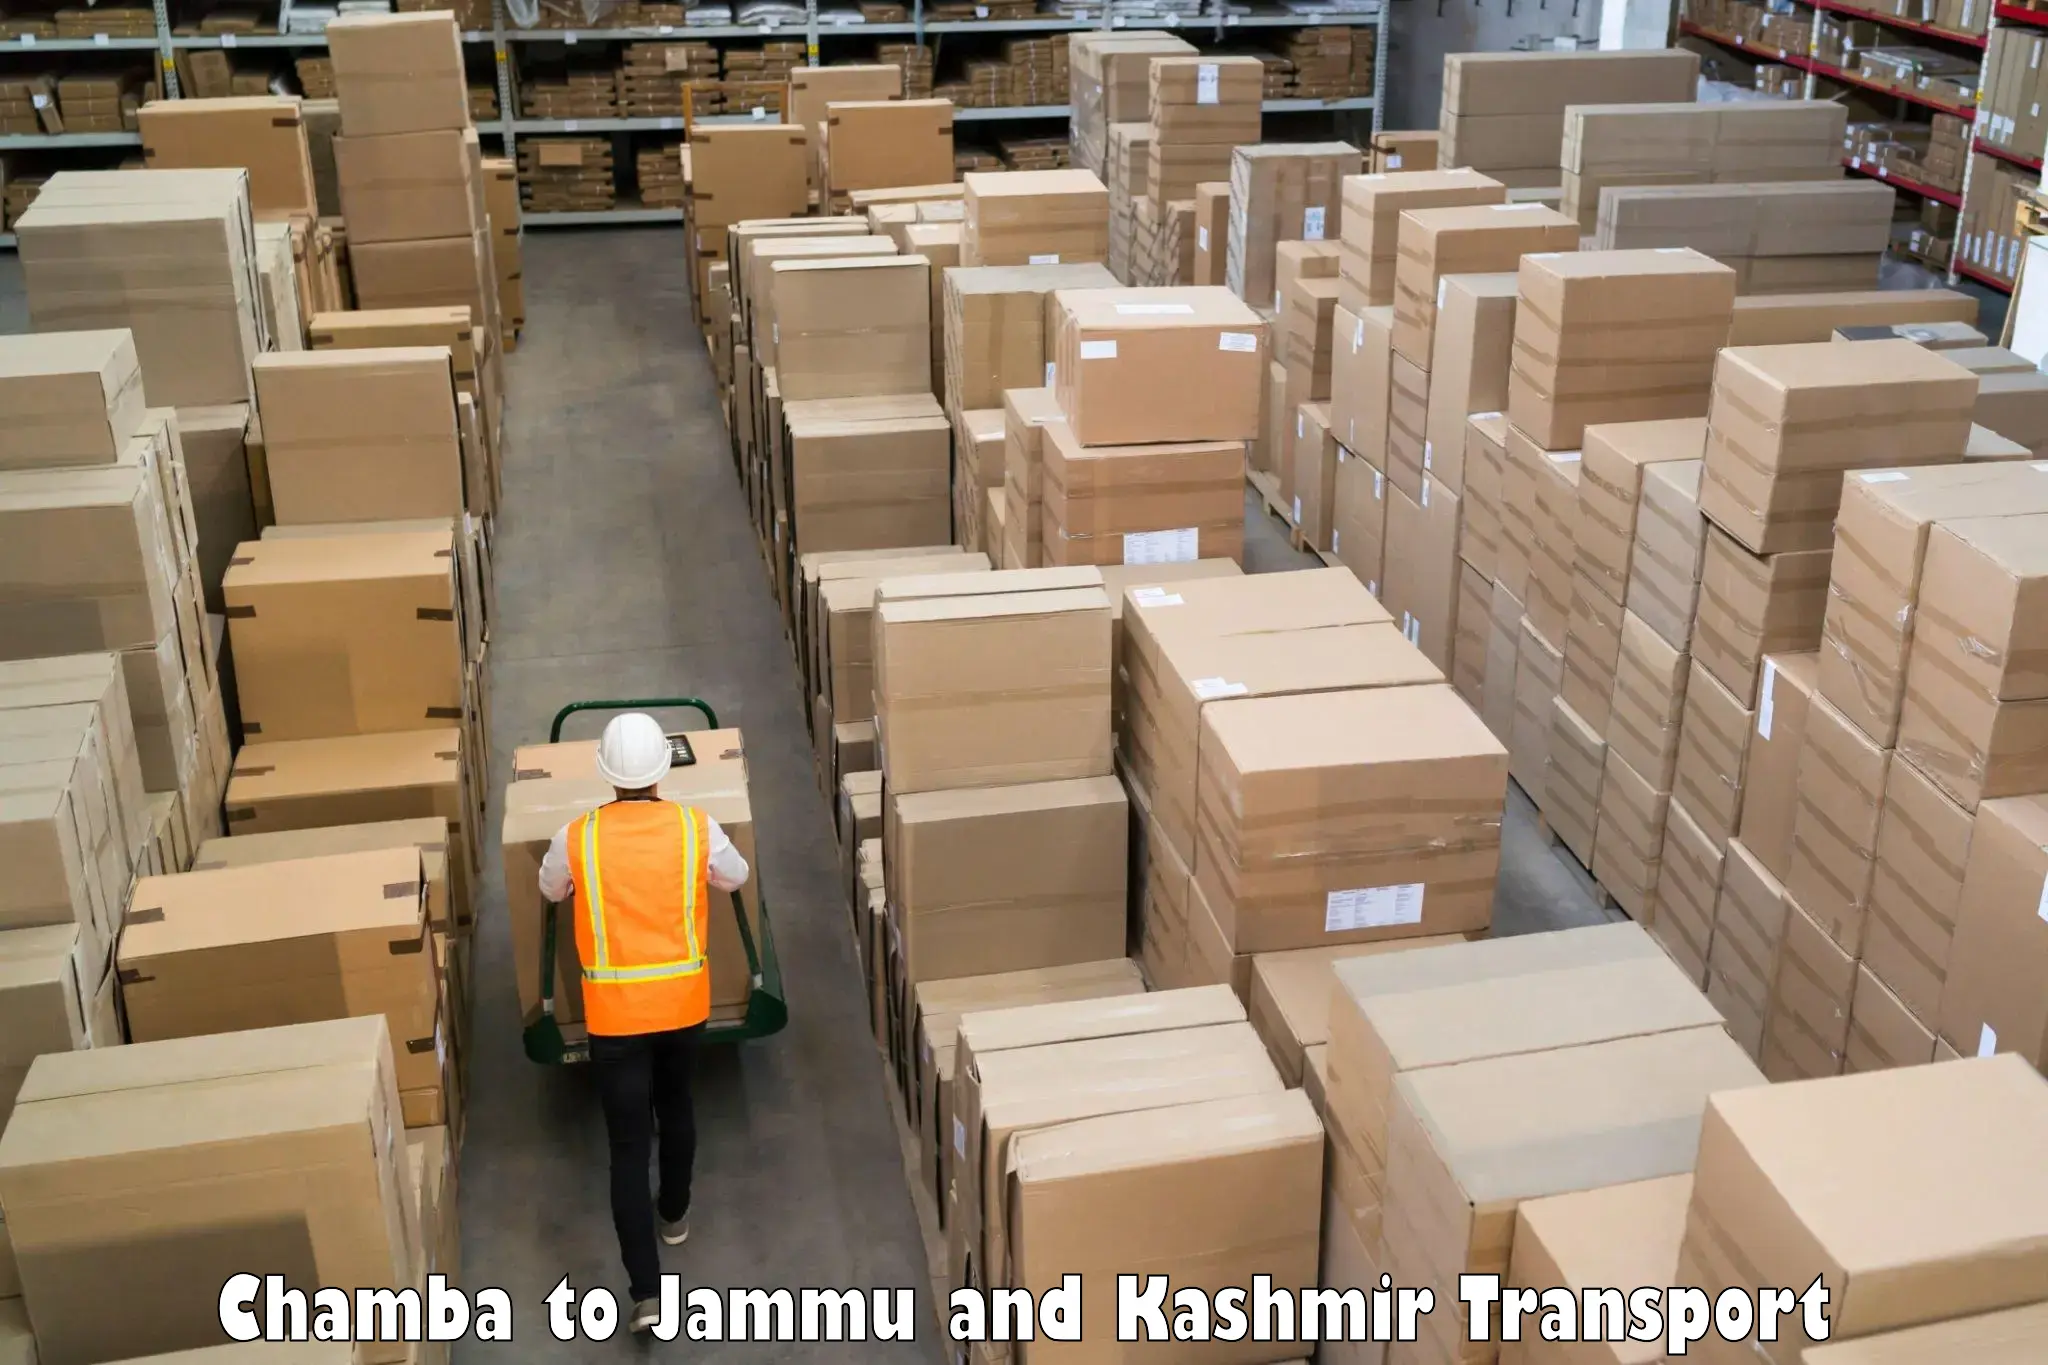 Nationwide transport services Chamba to Udhampur